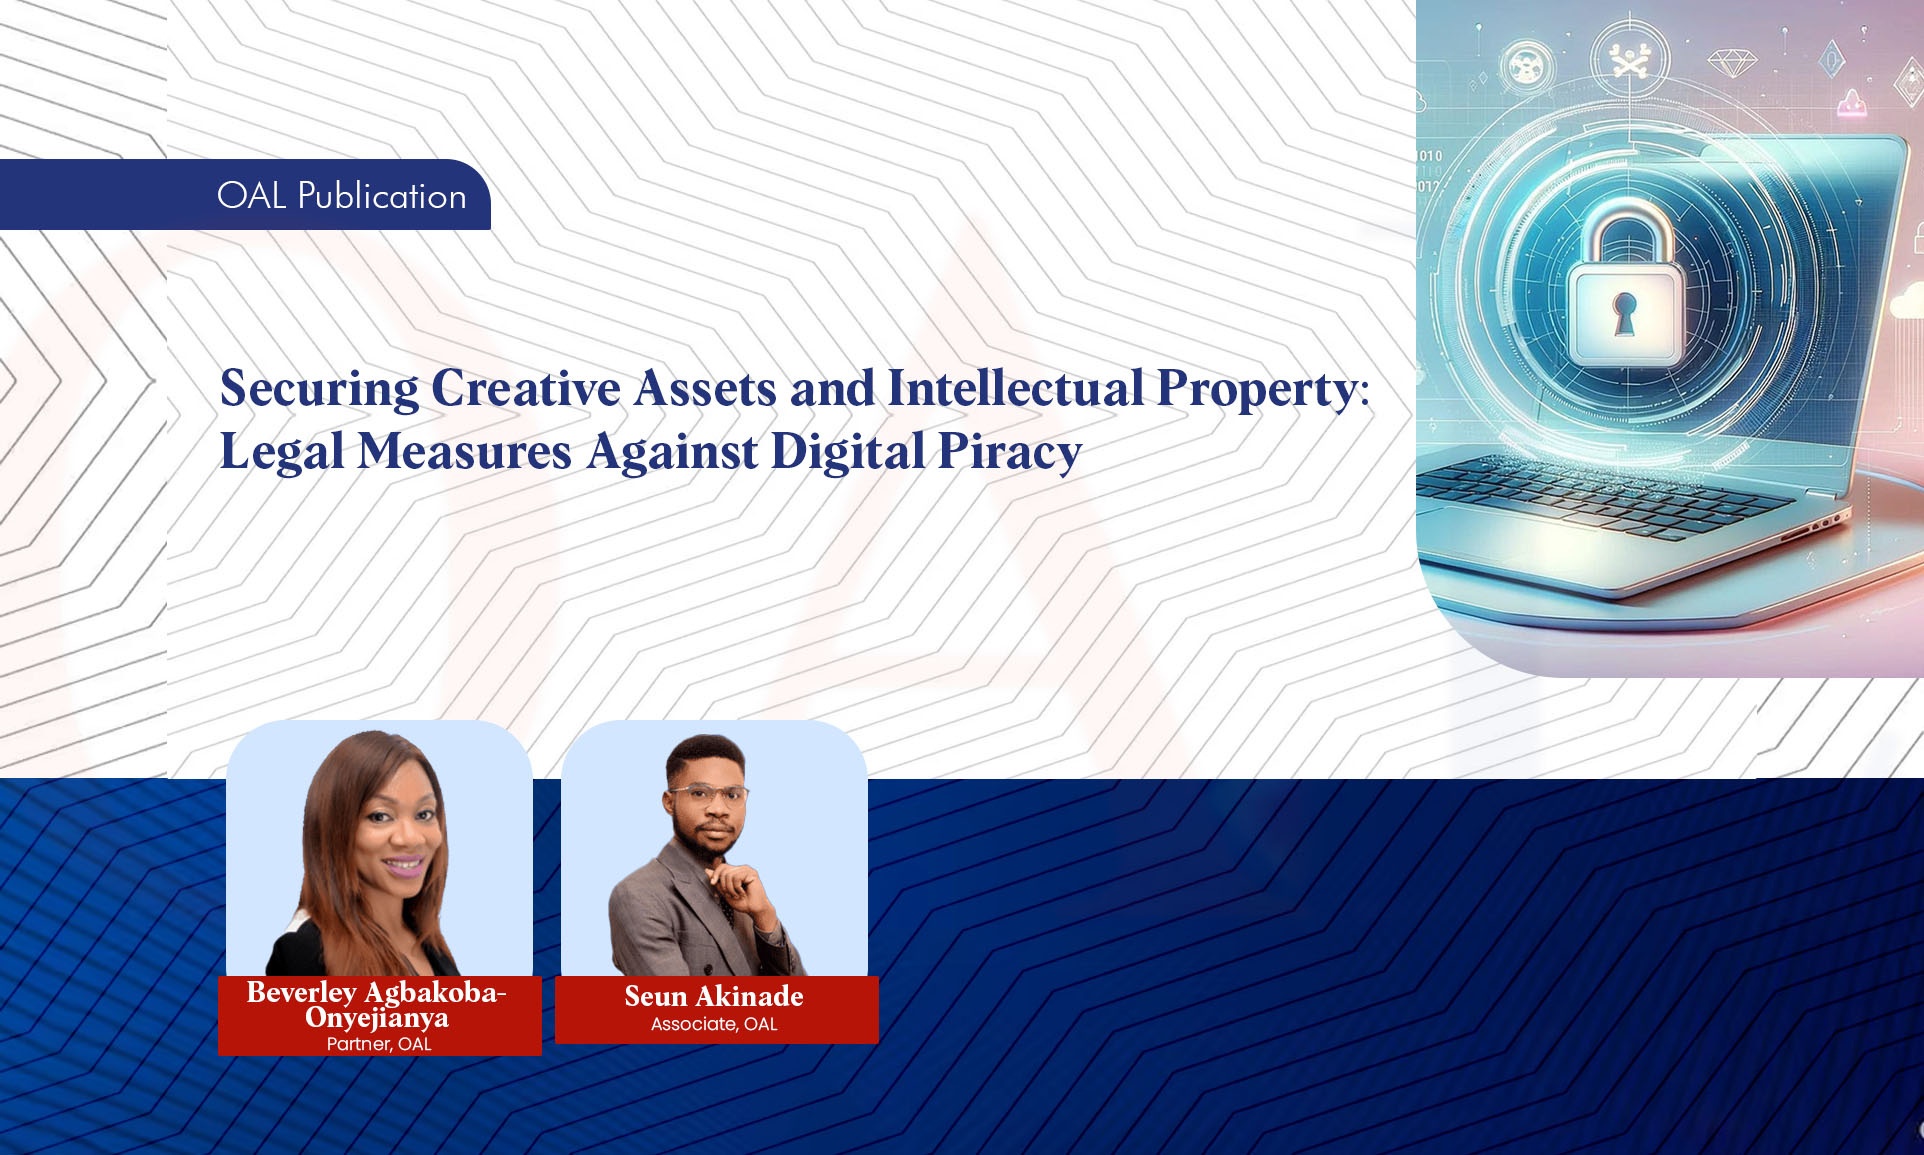 Securing Creative Assets and Intellectual Property: Legal Measures Against Digital Piracy